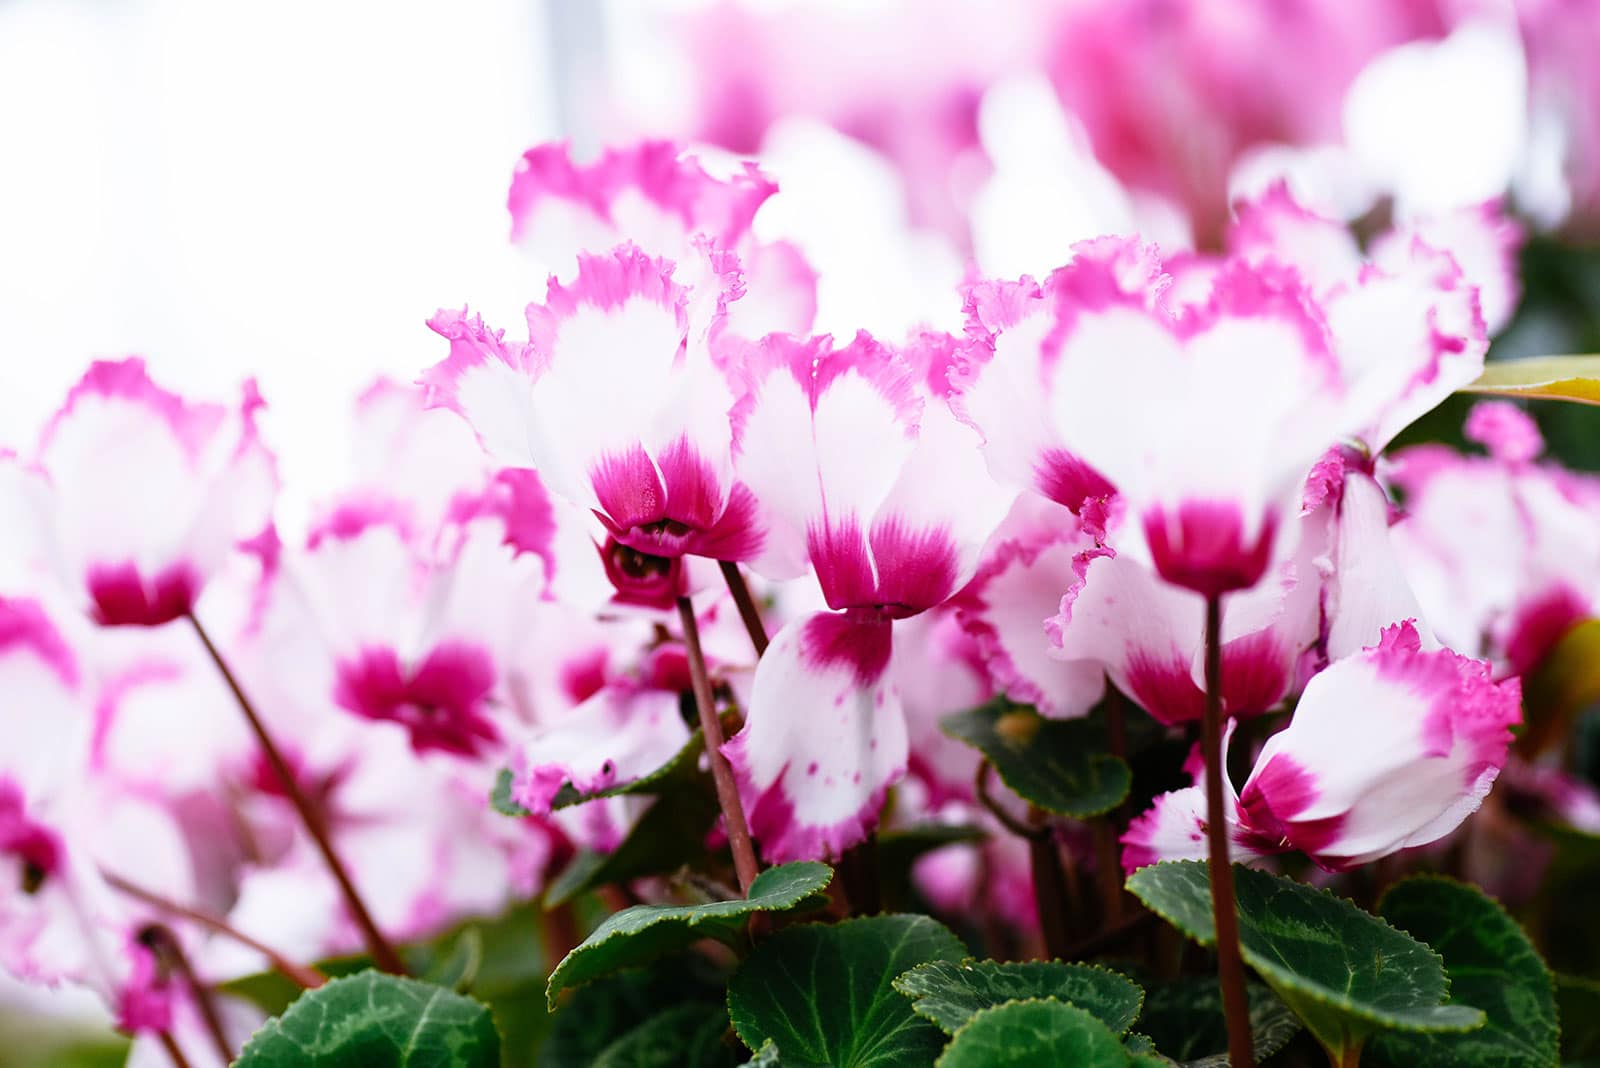 Close-up of white cyclamen flowers with pink centers and edges